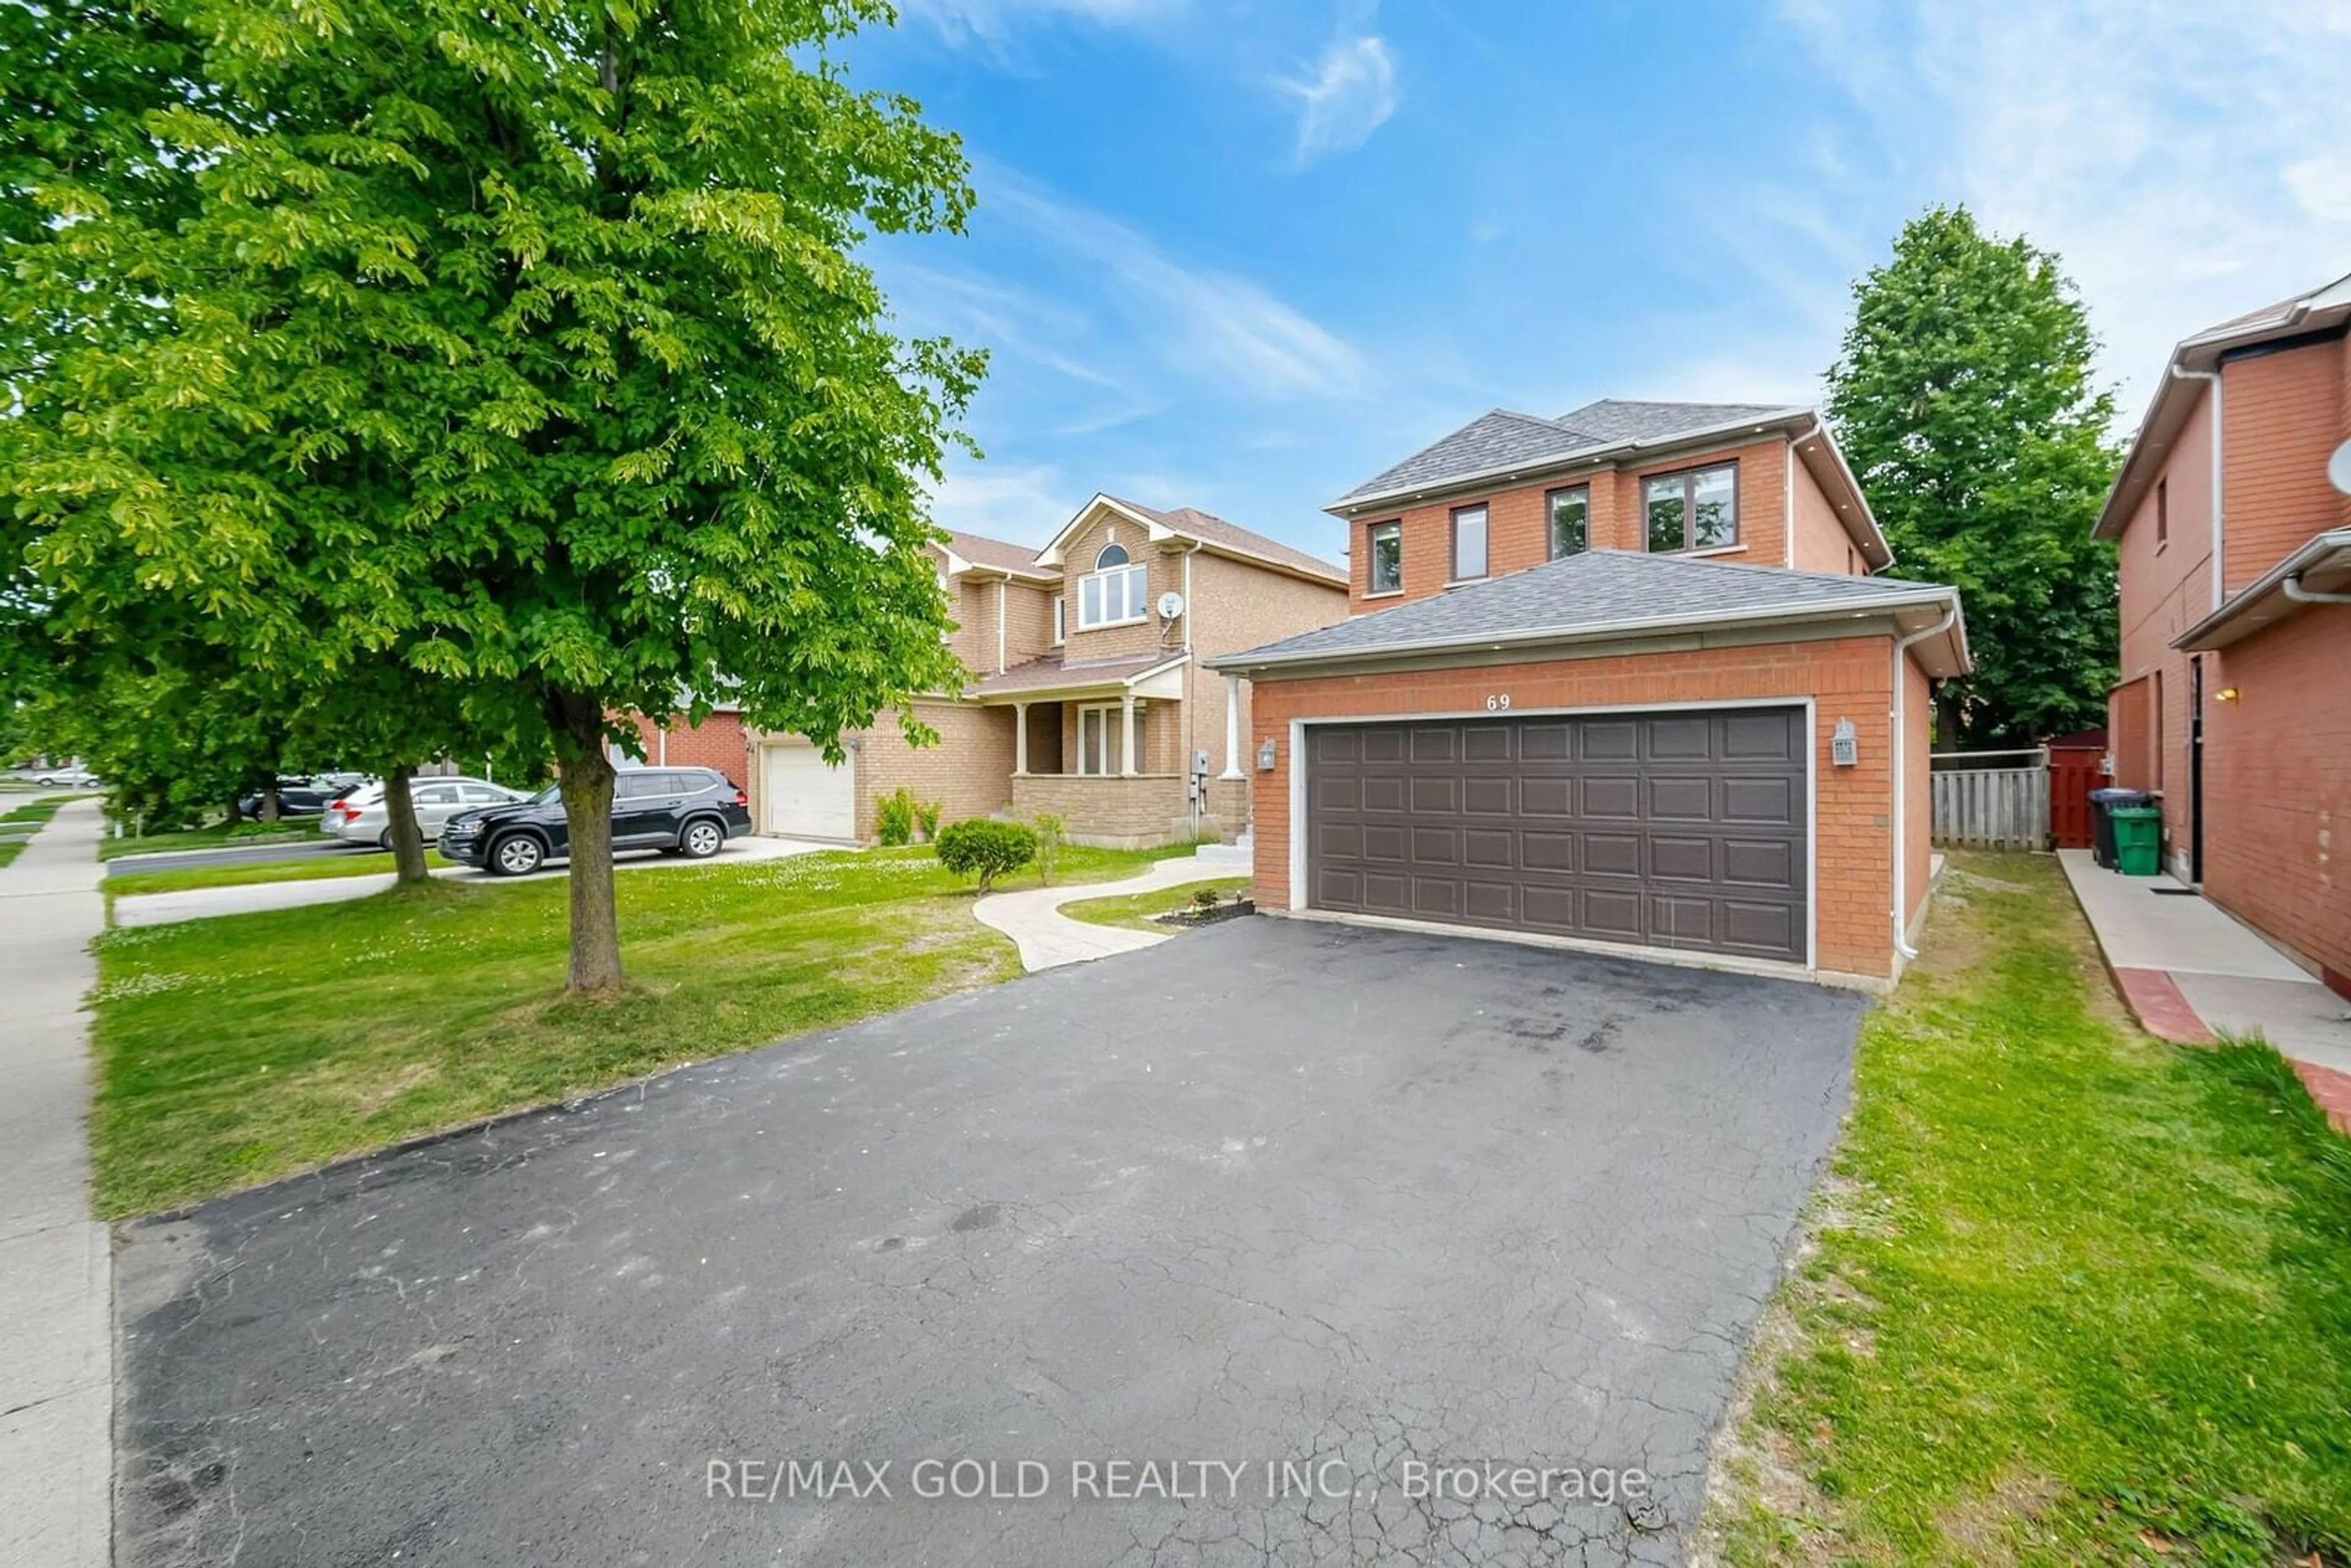 Frontside or backside of a home for 69 Softneedle Ave, Brampton Ontario L6R 1K9